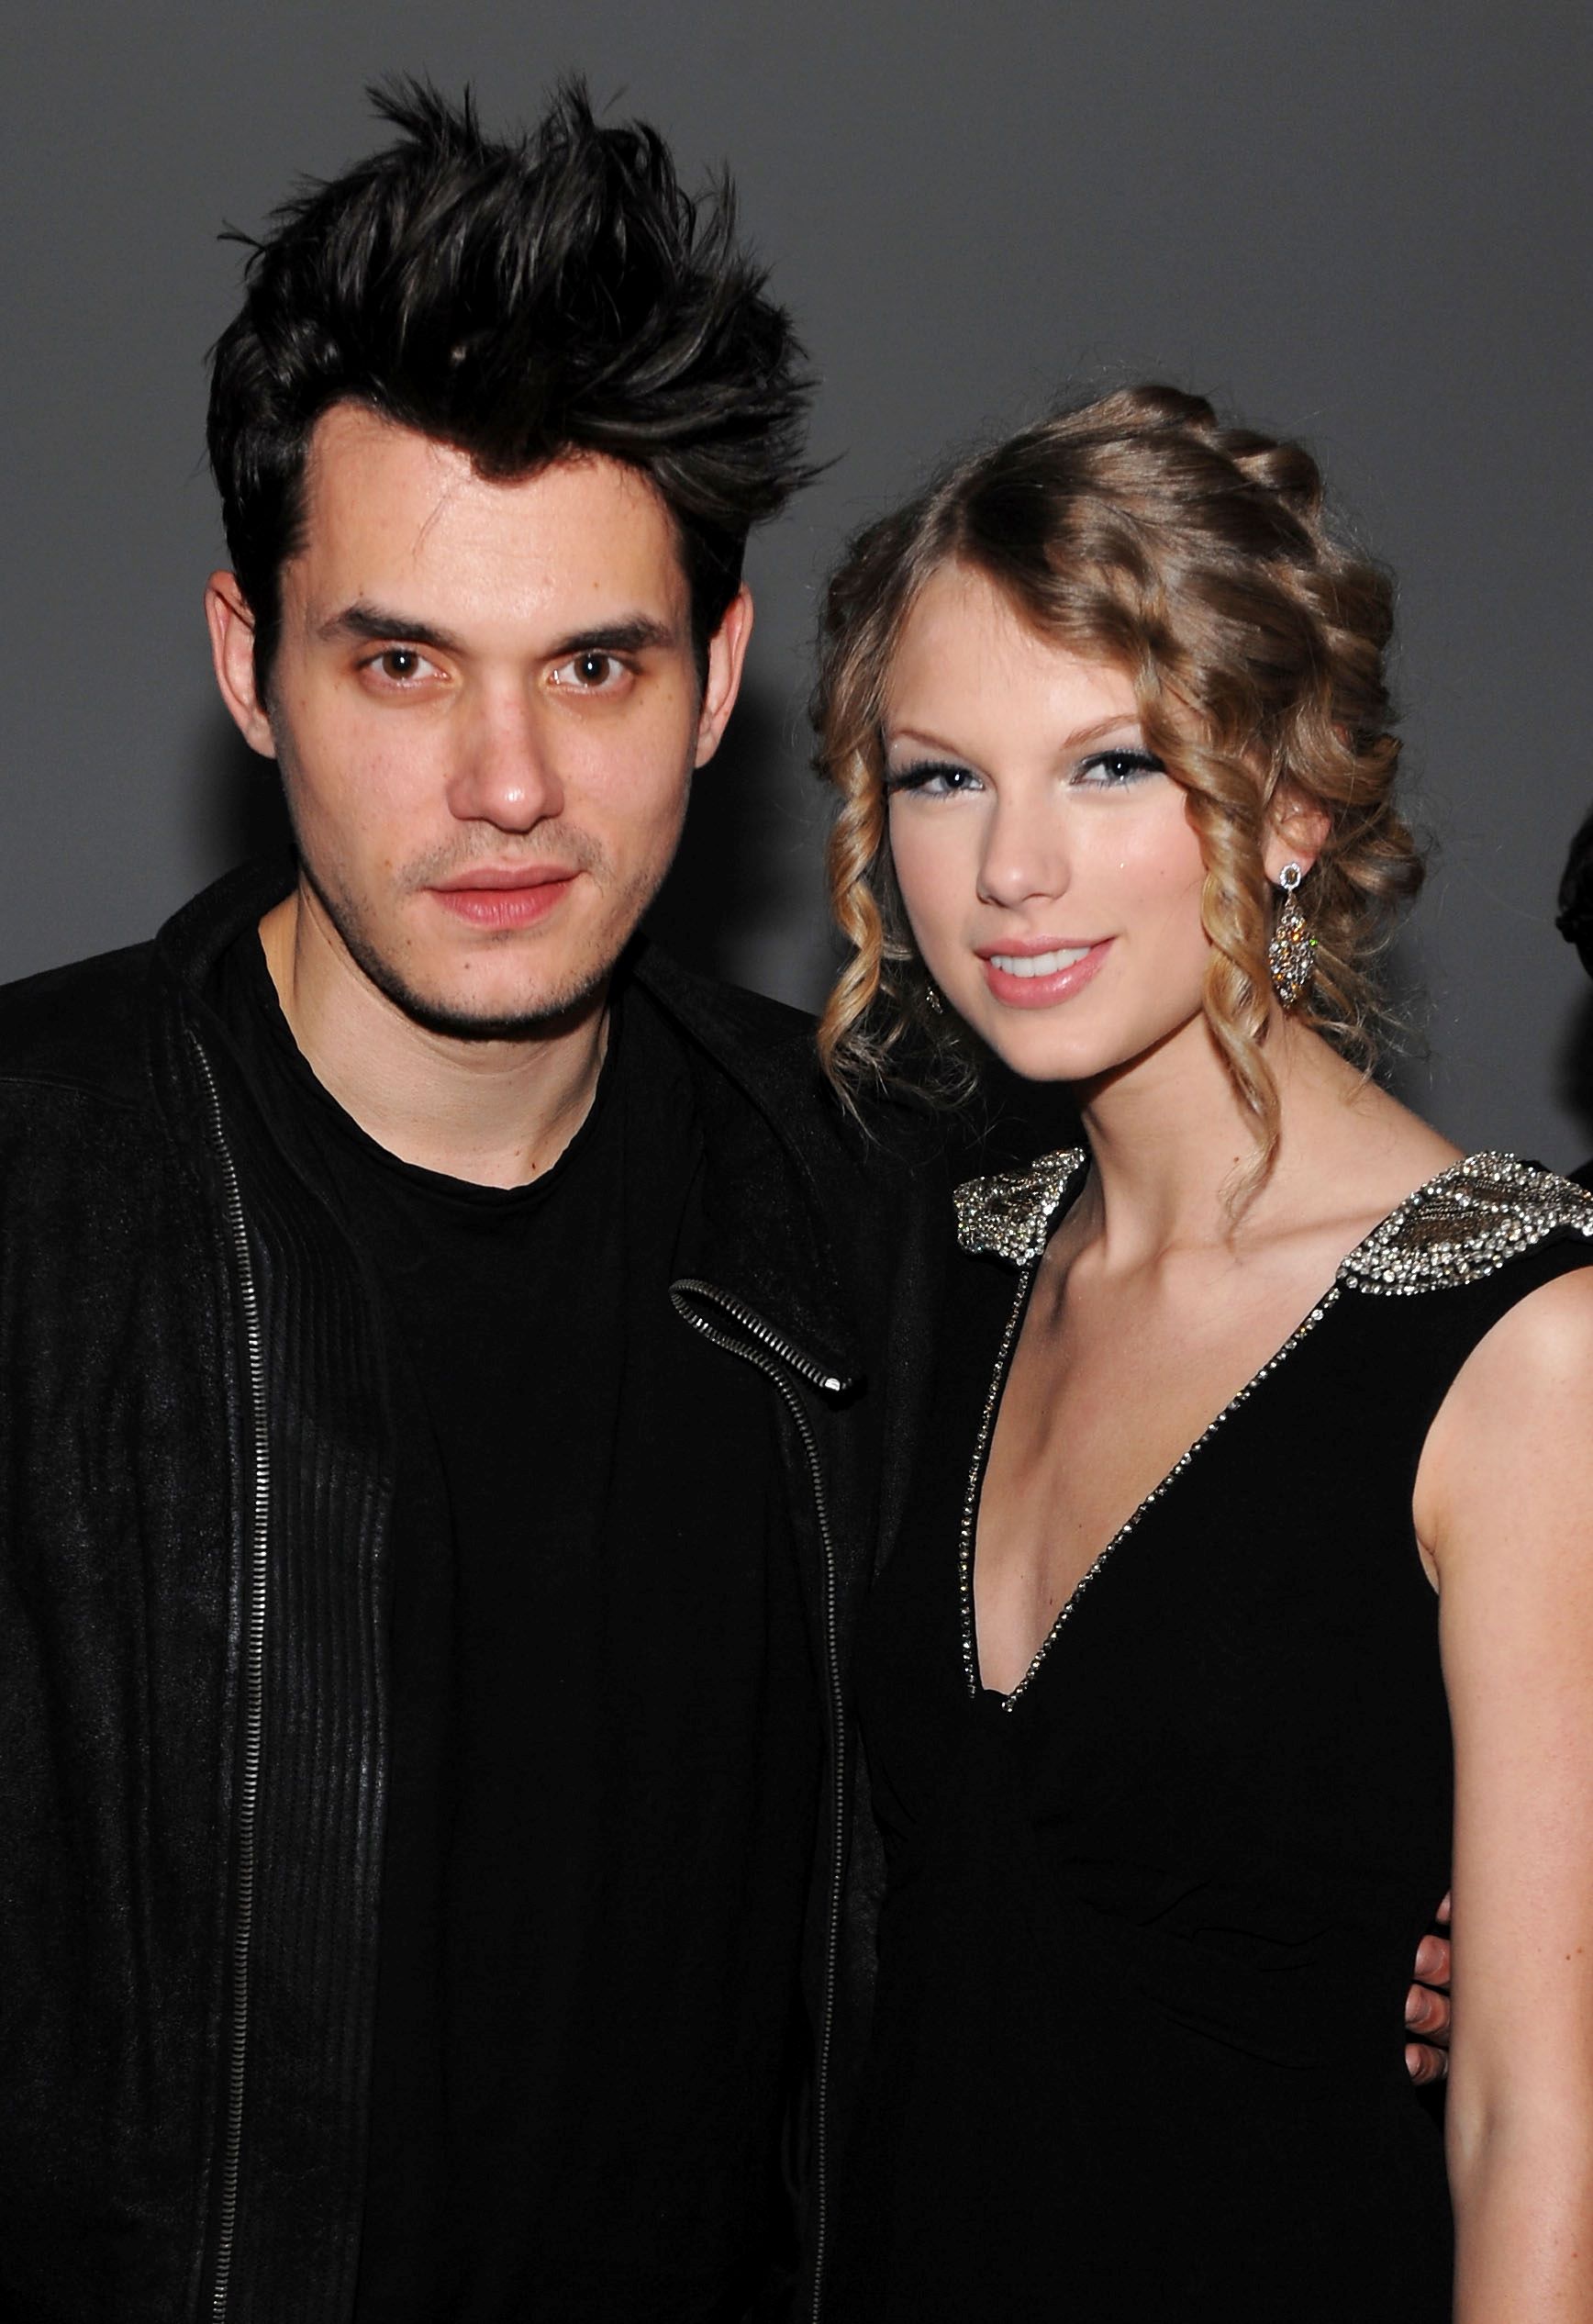 John Mayer (L) and Taylor Swift attend the launch of VEVO